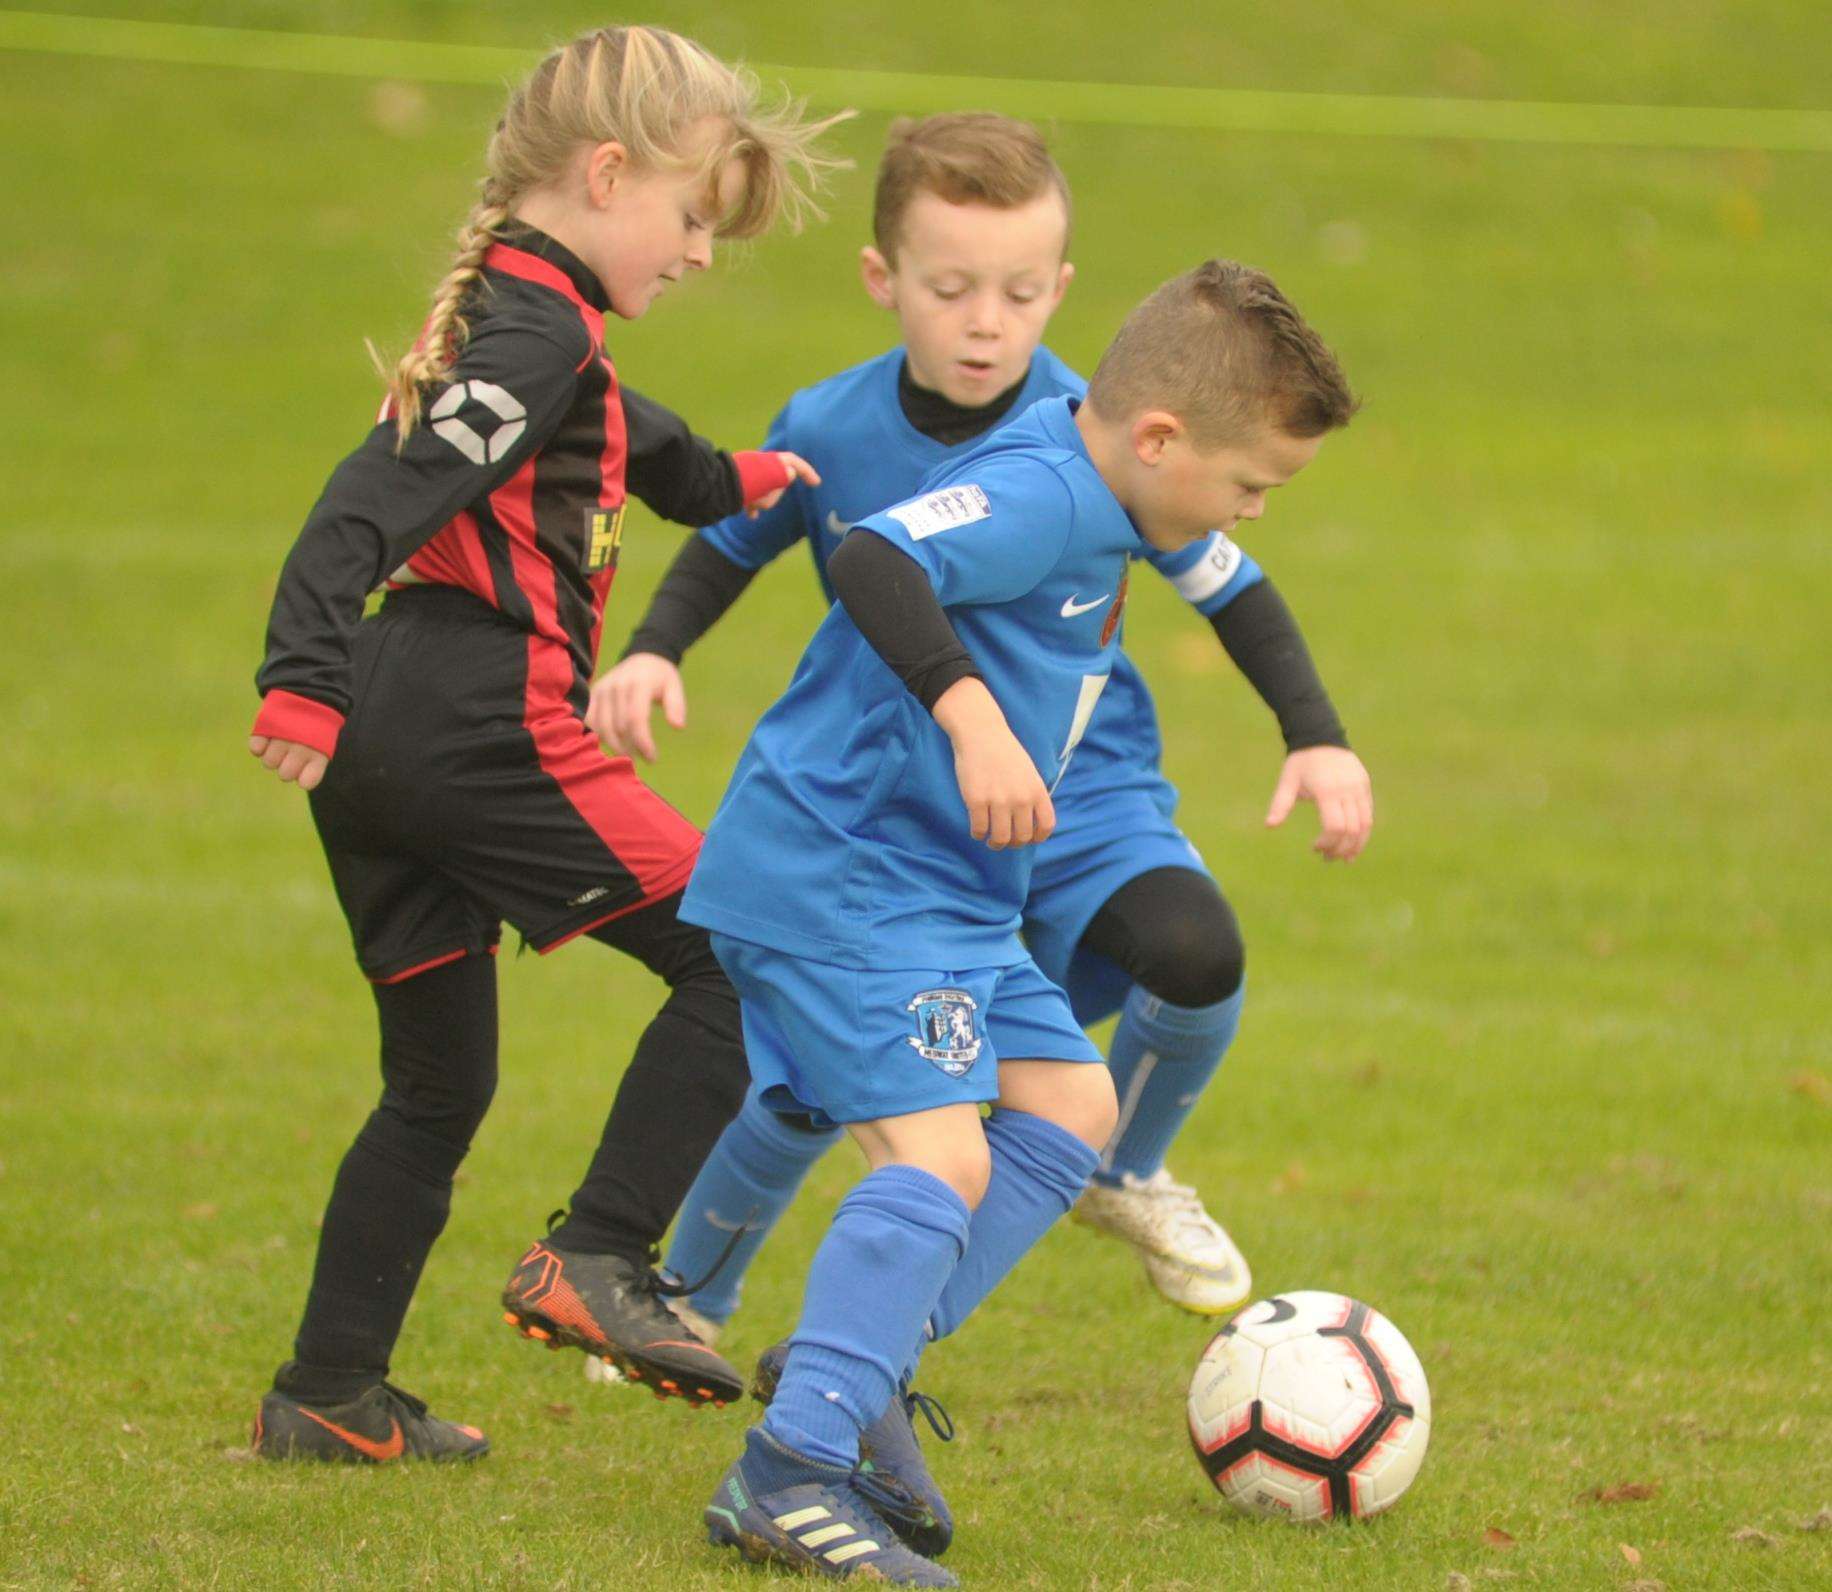 Under-8 sides Medway United West and Woodcoombe Youth battle it out Picture: Steve Crispe